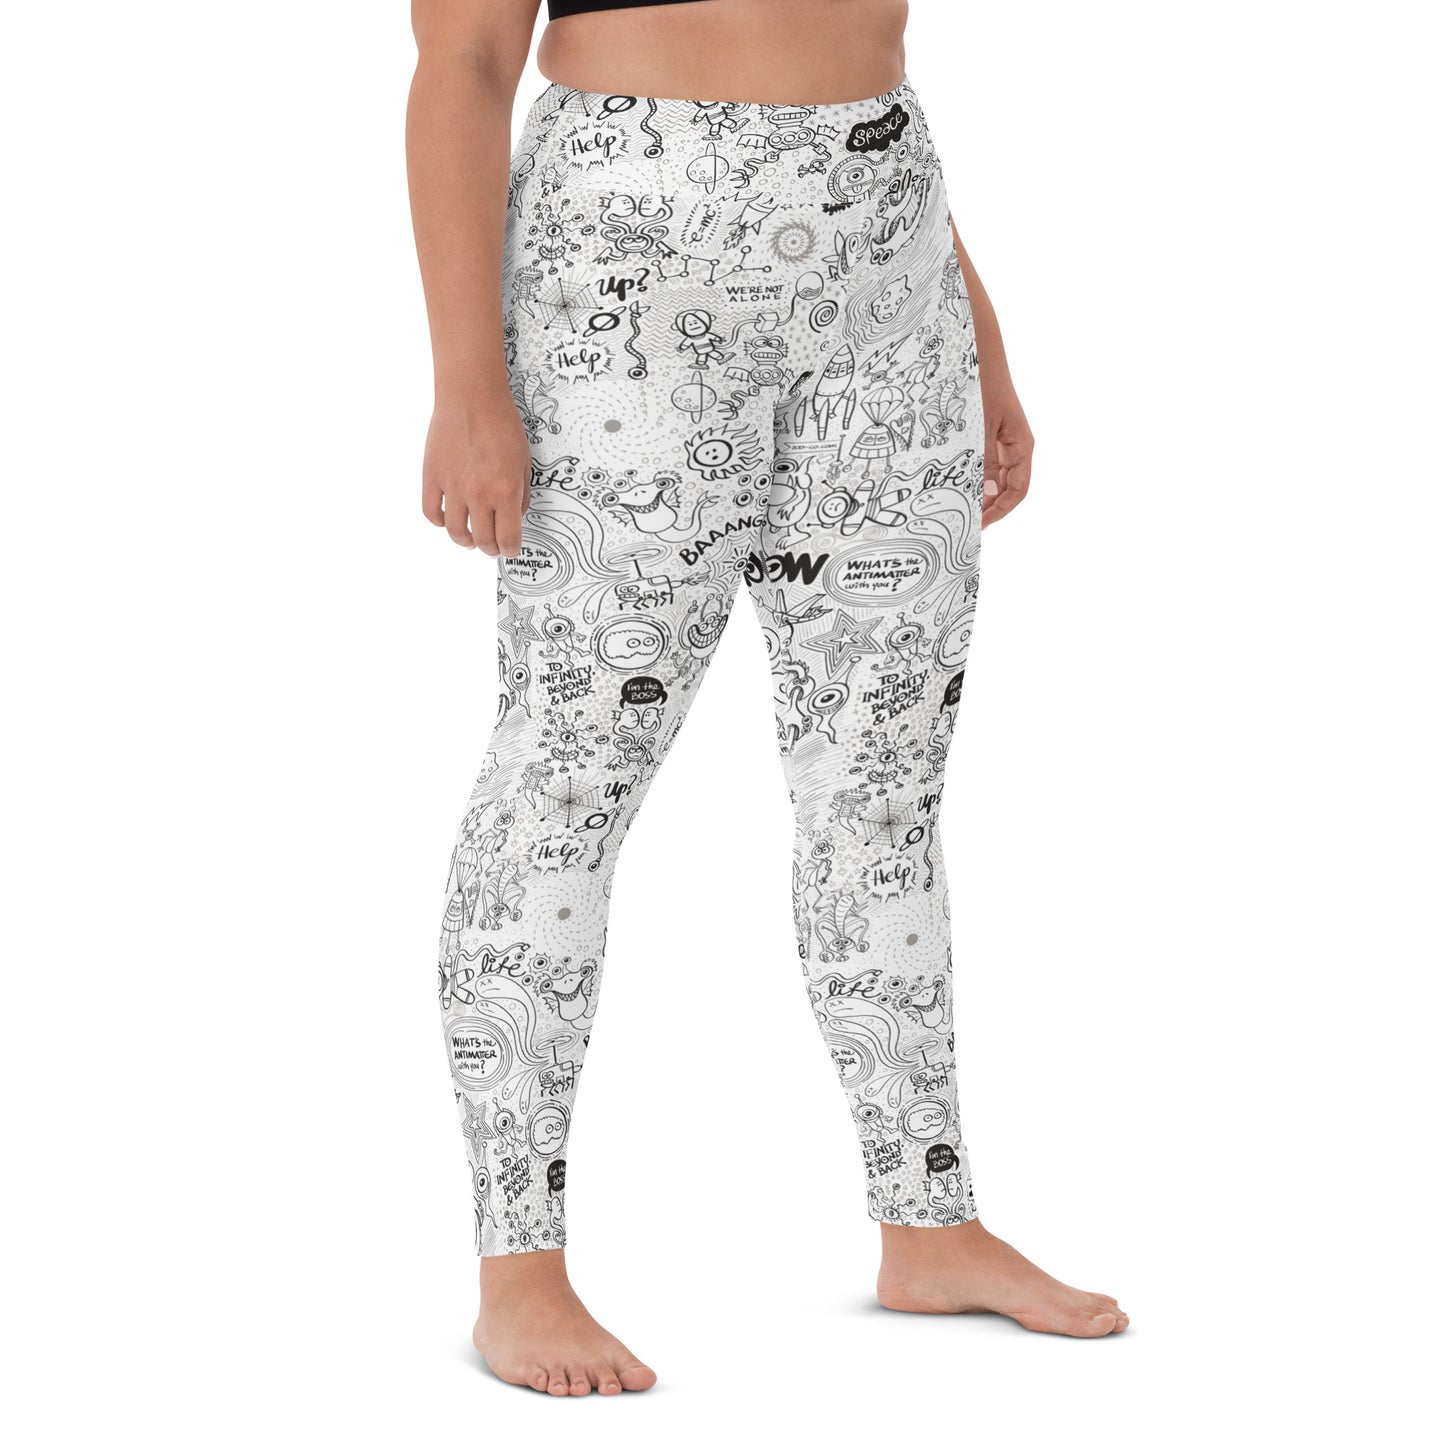 Celebrating the most comprehensive Doodle art of the universe Yoga Leggings. Overview